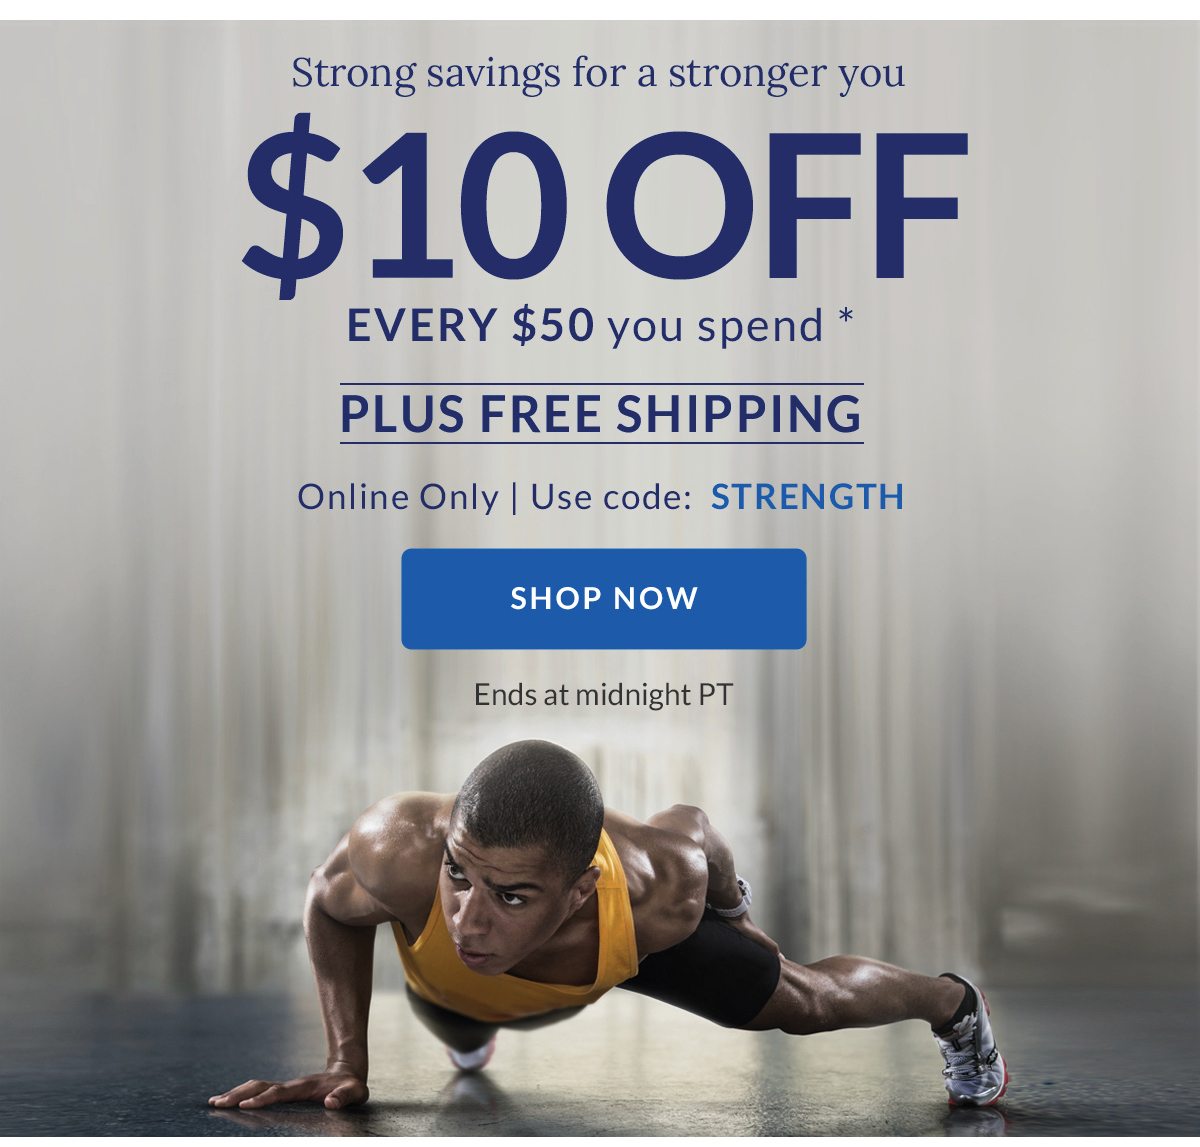 Strong savings for a stronger you | $10 OFF EVERY $50 you spend * | PLUS FREE SHIPPING | Online Only | Use code: STRENGTH | SHOP NOW | Ends at midnight PT